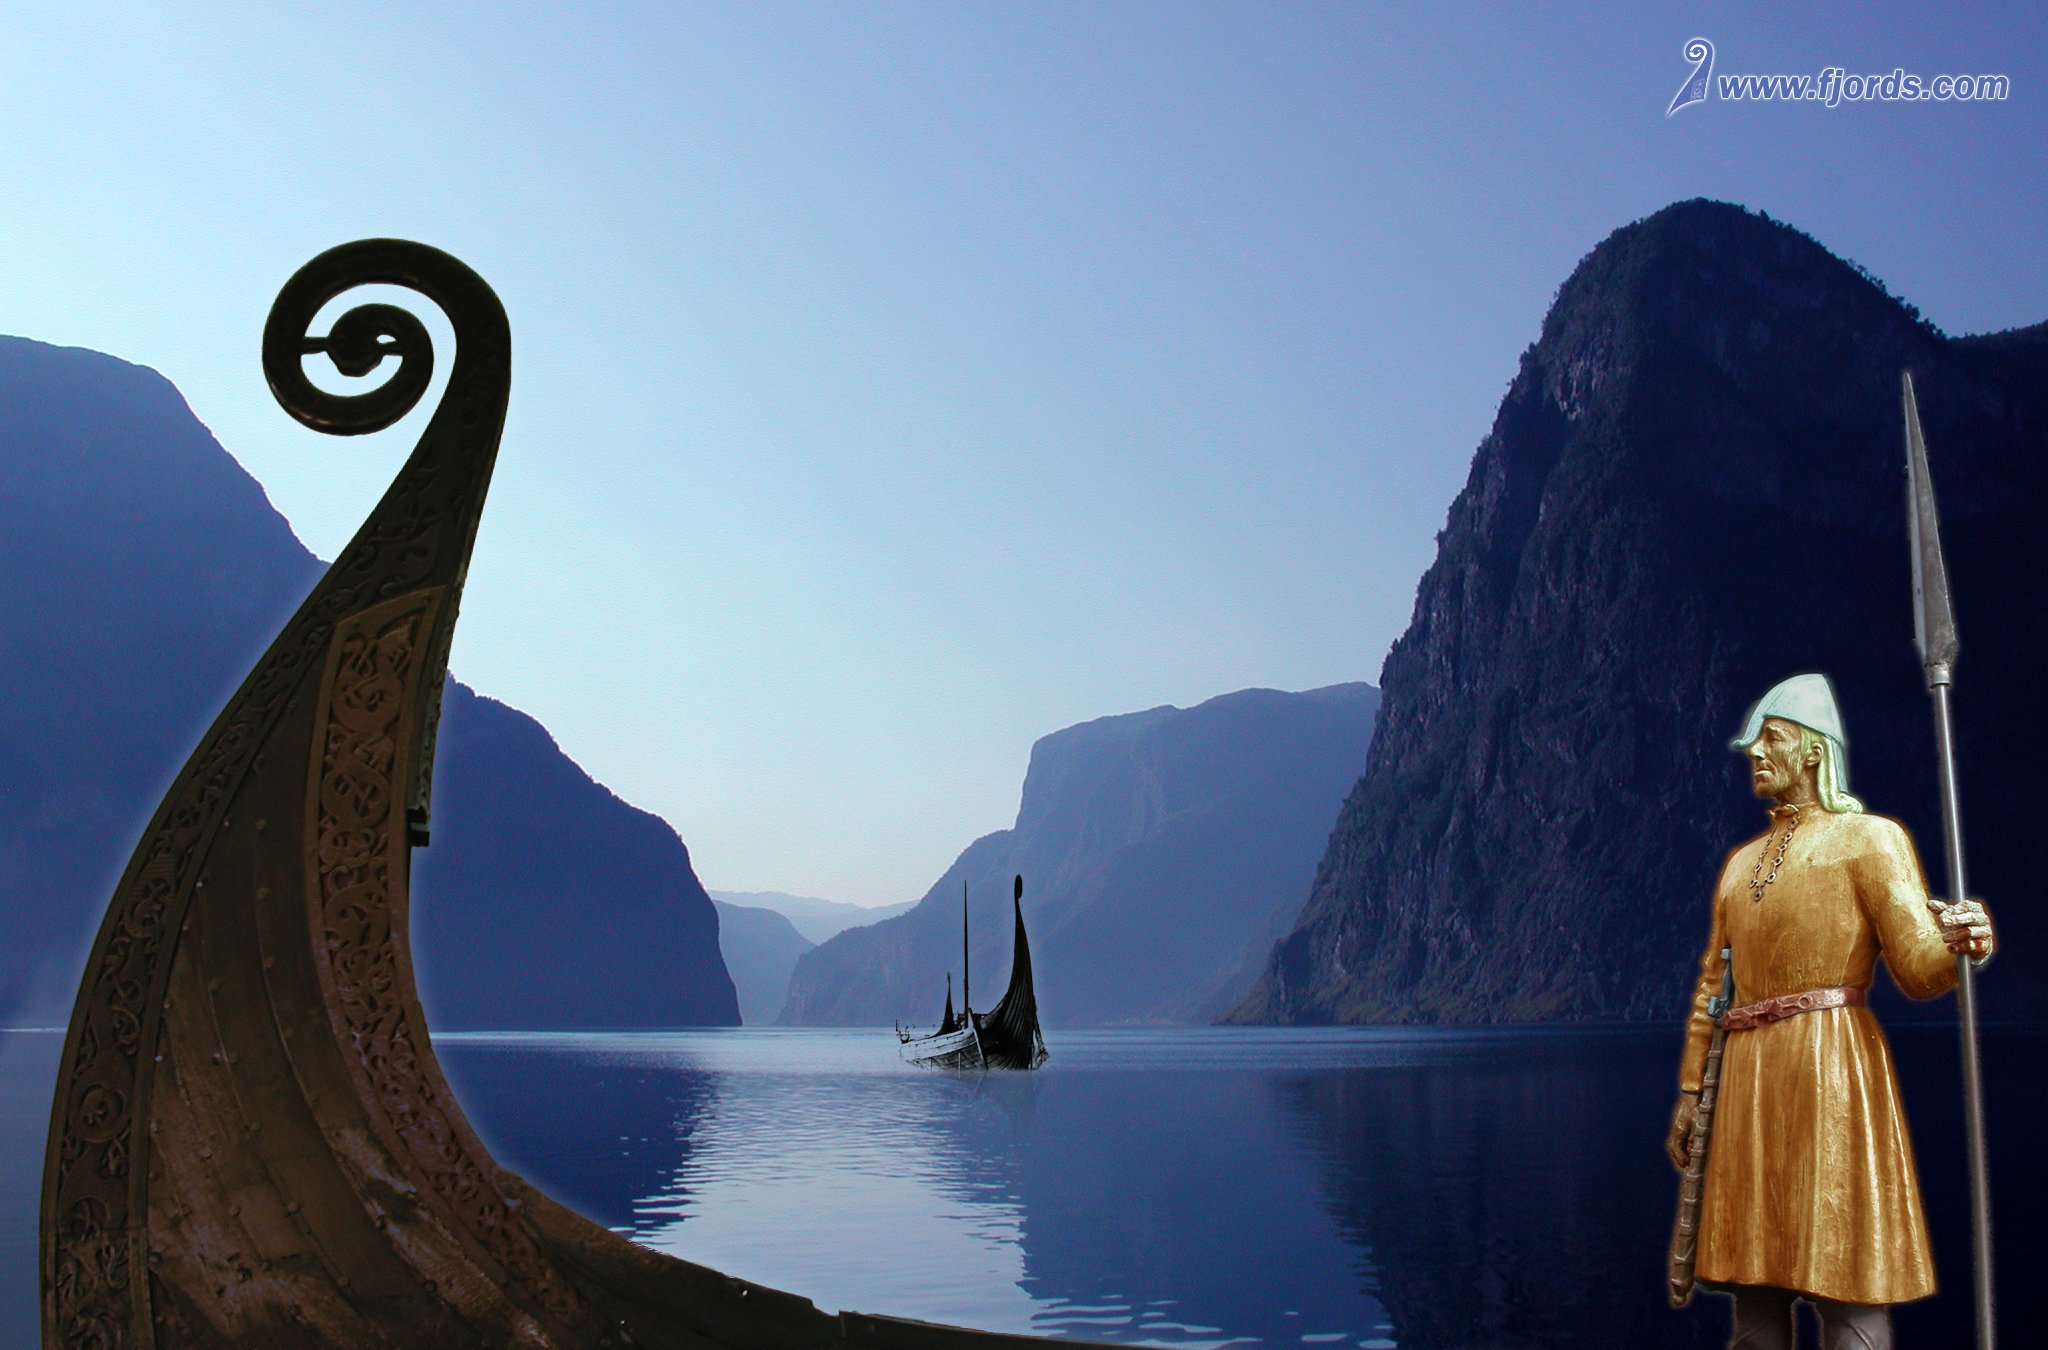 Fjordscom   Wallpaper from Norway and the Norwegian Fjords delivered